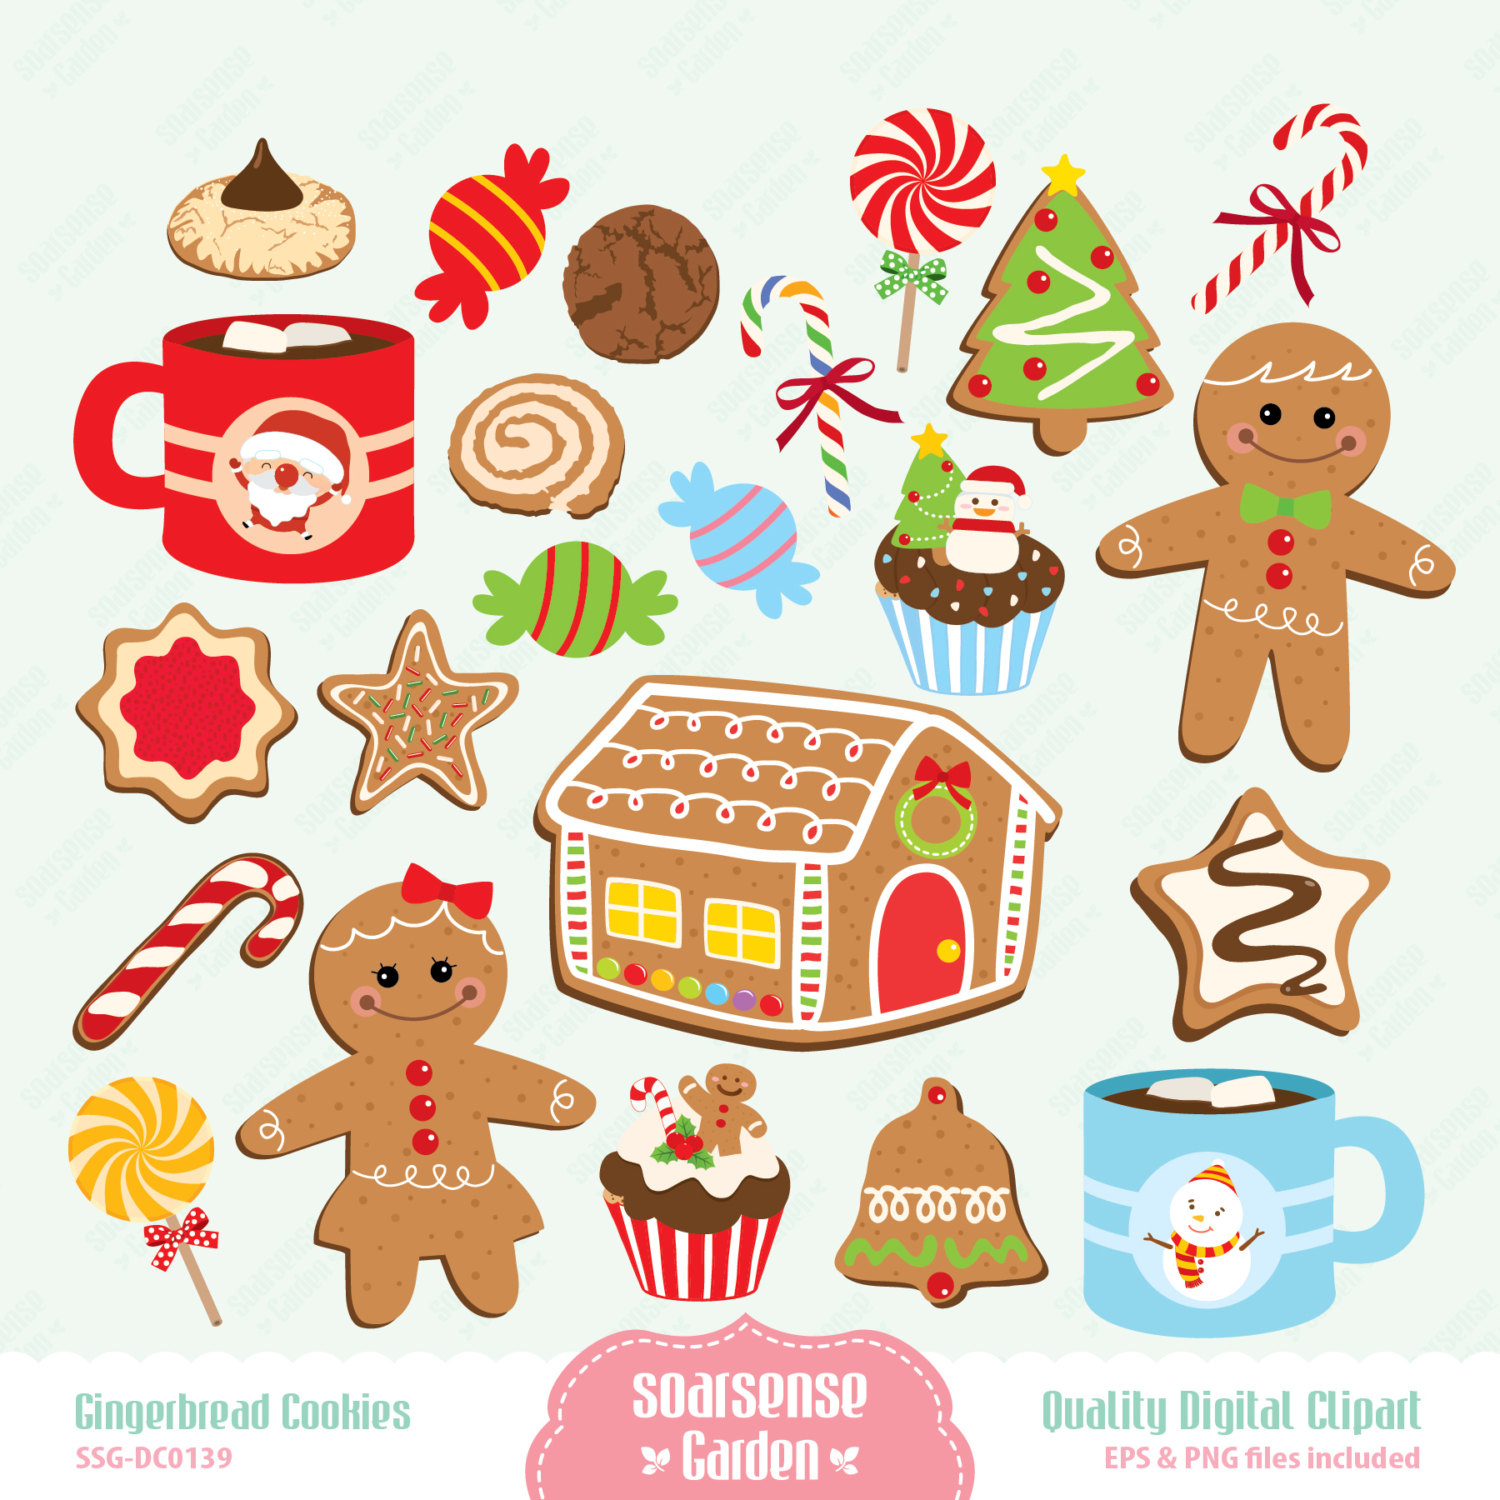 Free Vintage Gingerbread Cliparts, Download Free Clip Art, Free Clip Art on Clipart ...1500 x 1500